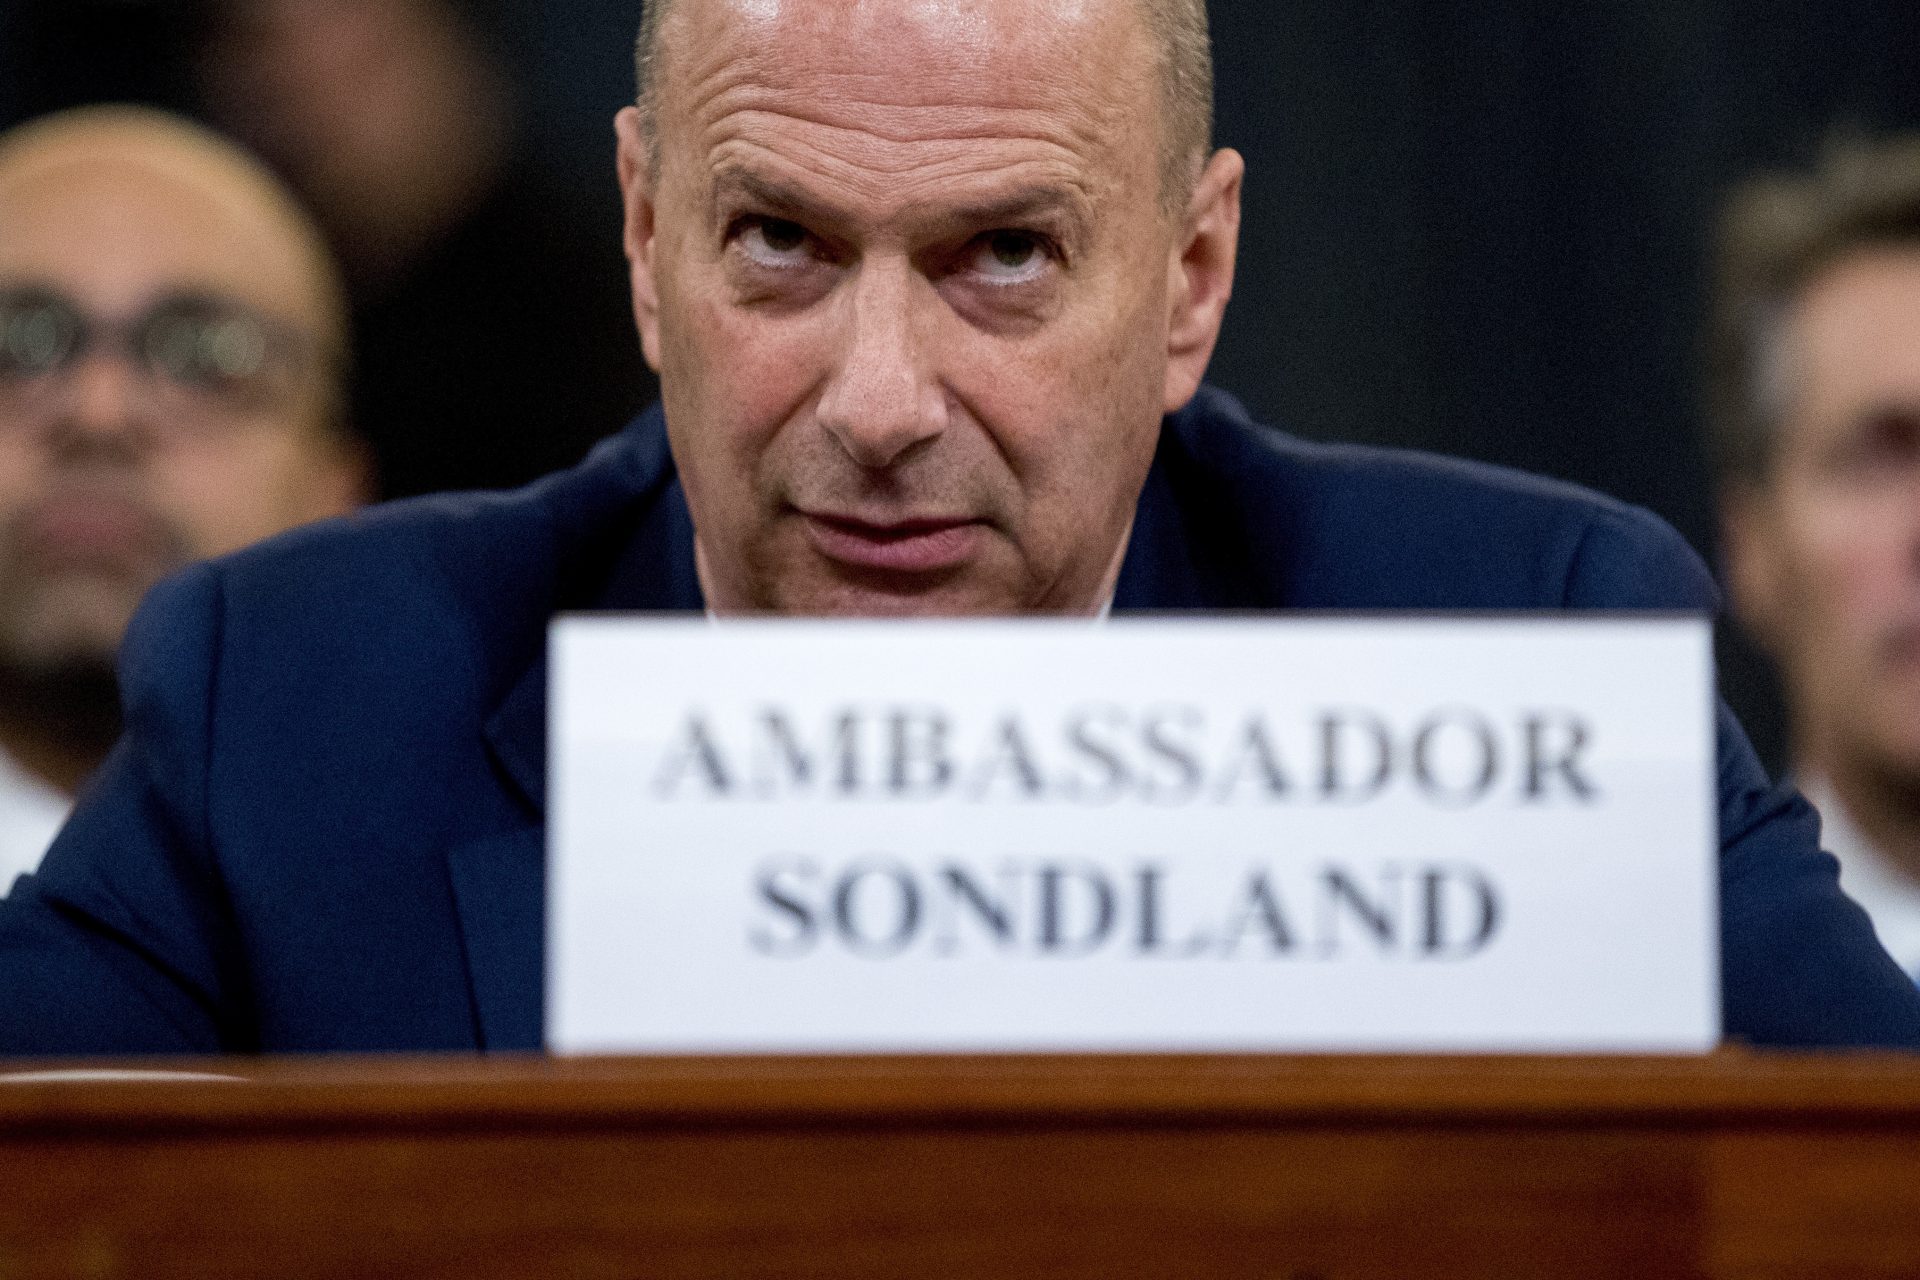 Ambassador Gordon Sondland, U.S. Ambassador to the European Union, center, appears before the House Intelligence Committee on Capitol Hill in Washington, Wednesday, Nov. 20, 2019, during a public impeachment hearing of President Donald Trump's efforts to tie U.S. aid for Ukraine to investigations of his political opponents.